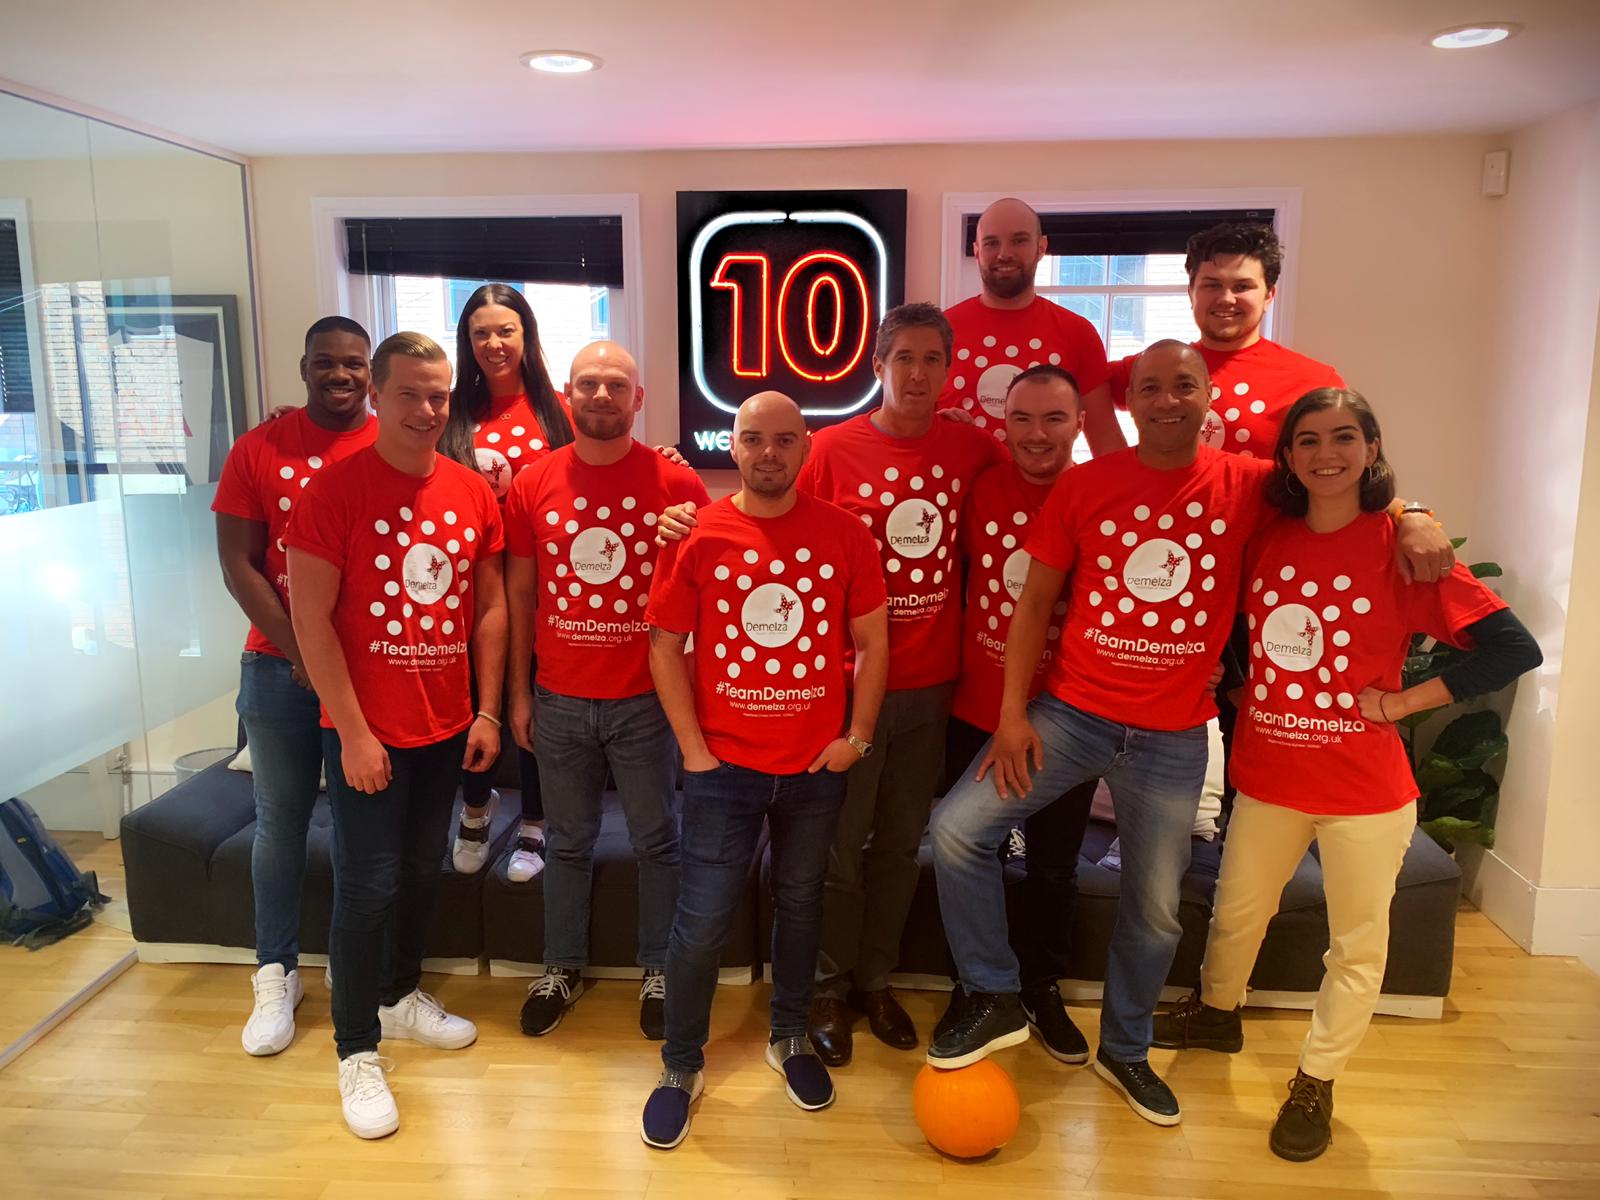 Red10 employees fundraise at work for Demelza, they are wearing Demelza polka dot tops.